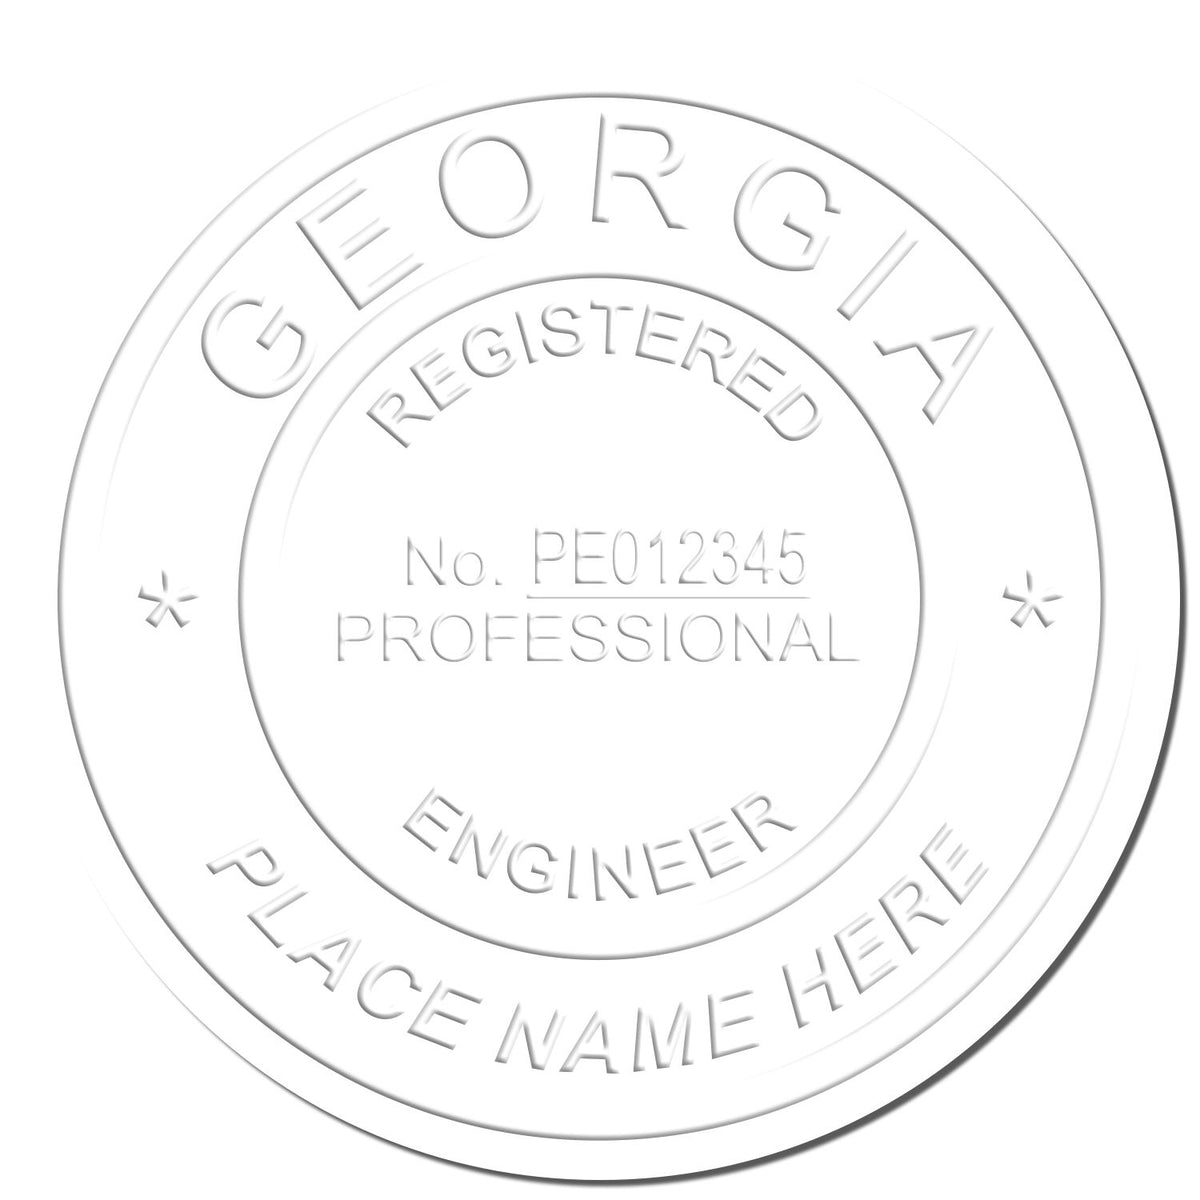 This paper is stamped with a sample imprint of the State of Georgia Extended Long Reach Engineer Seal, signifying its quality and reliability.